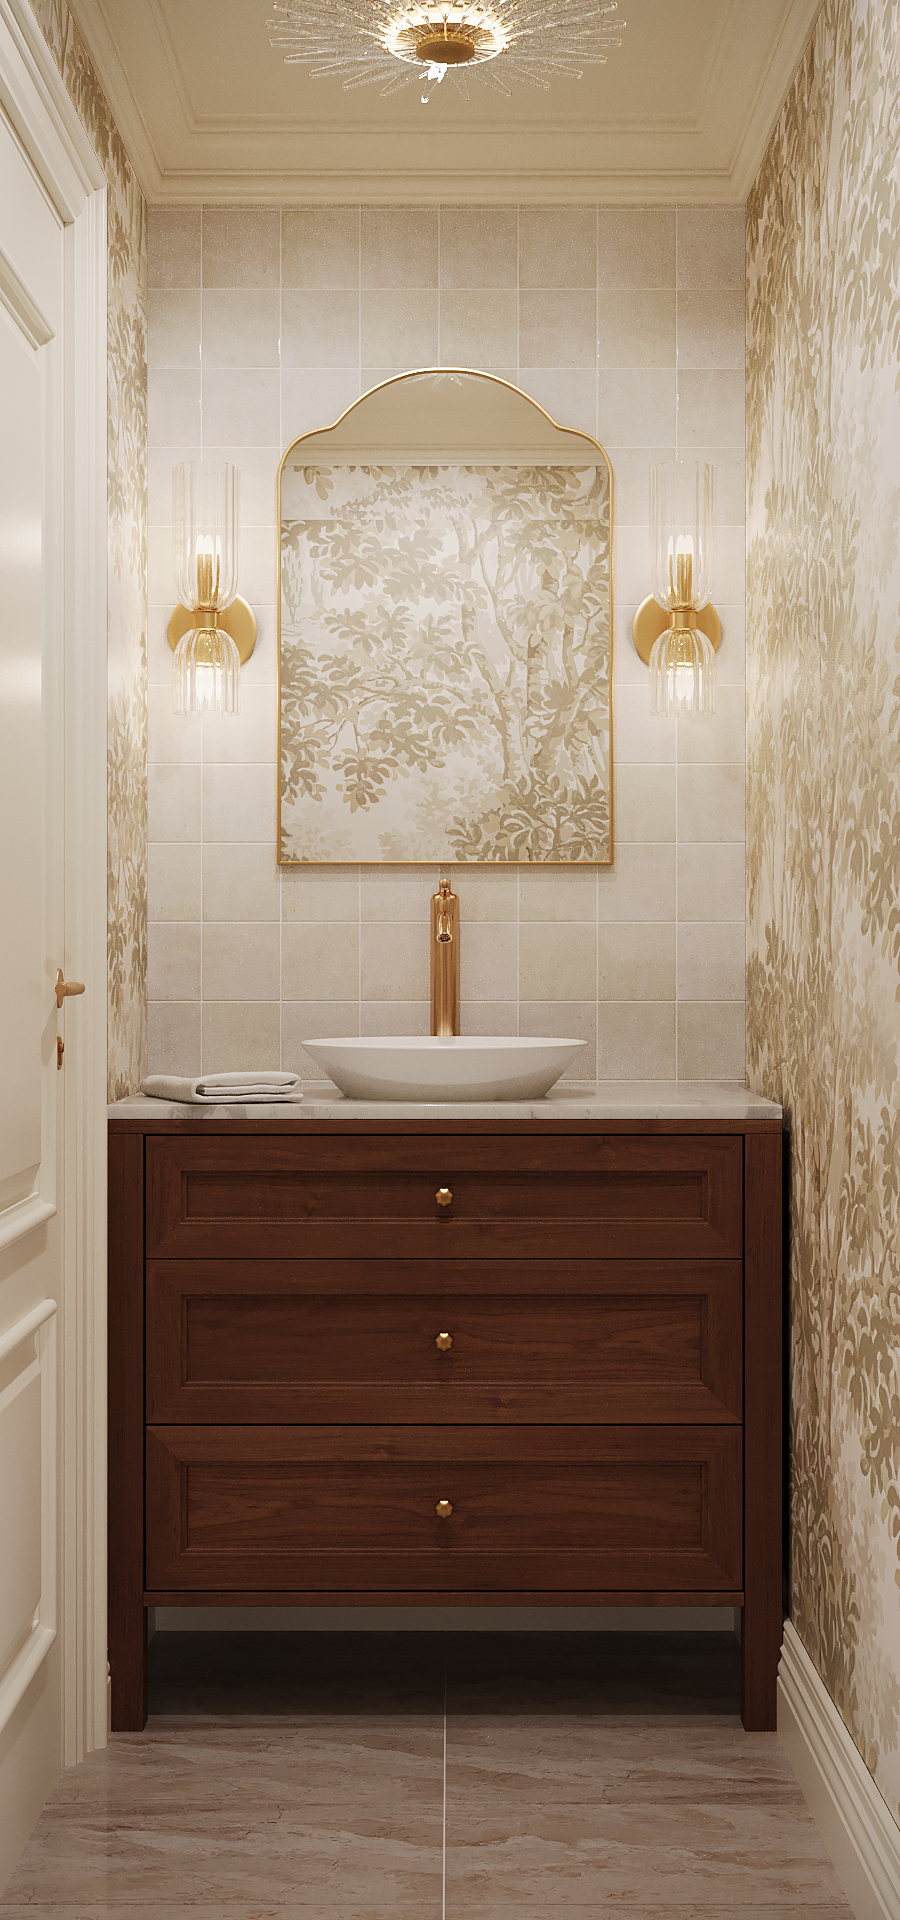 Ambler half bathroom collection wood vanity with neutral forest wallpaper